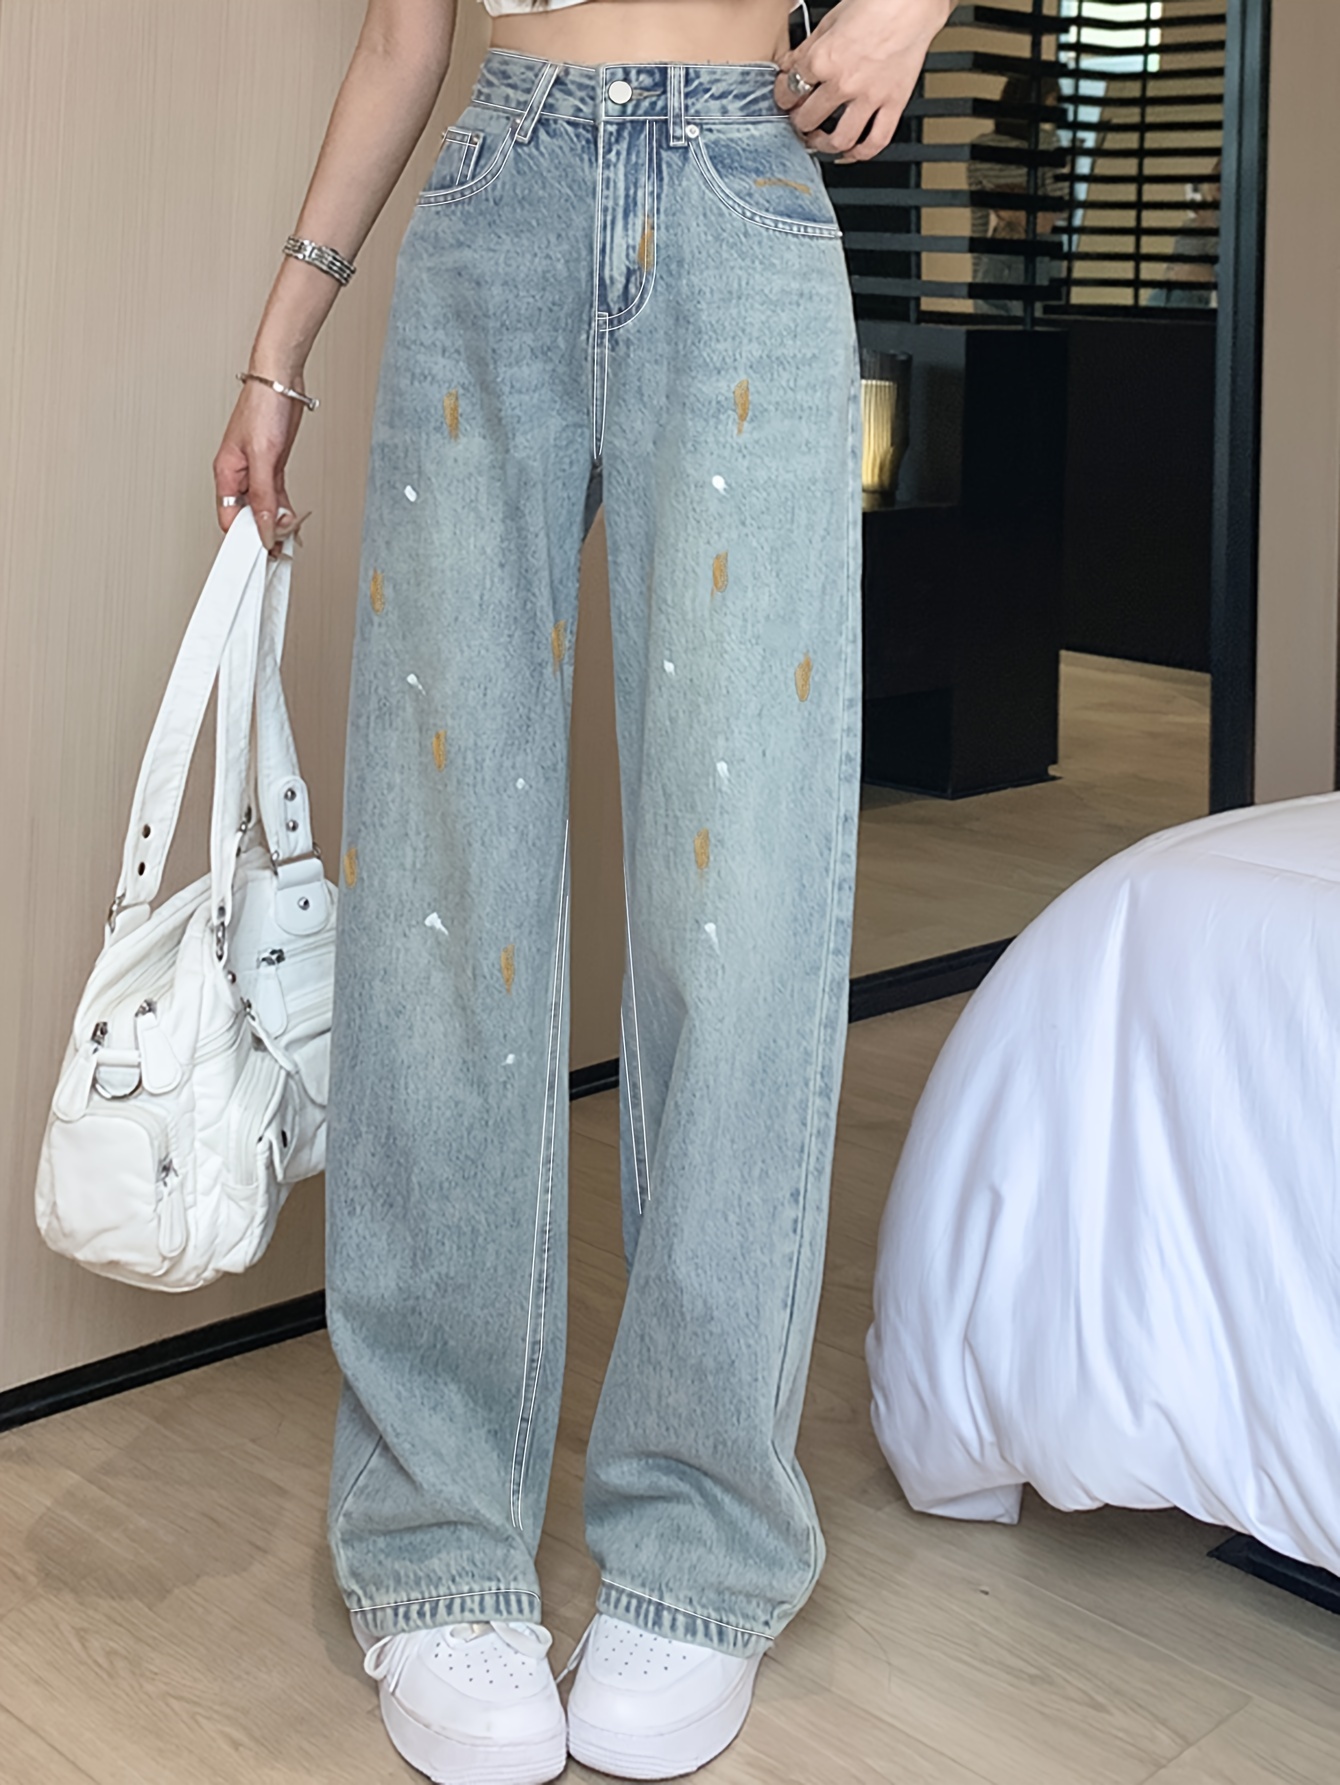 Cartoon & Letter Print Straight Jeans, Loose Fit Non-Stretch Casual Denim  Pants, Women's Denim Jeans & Clothing